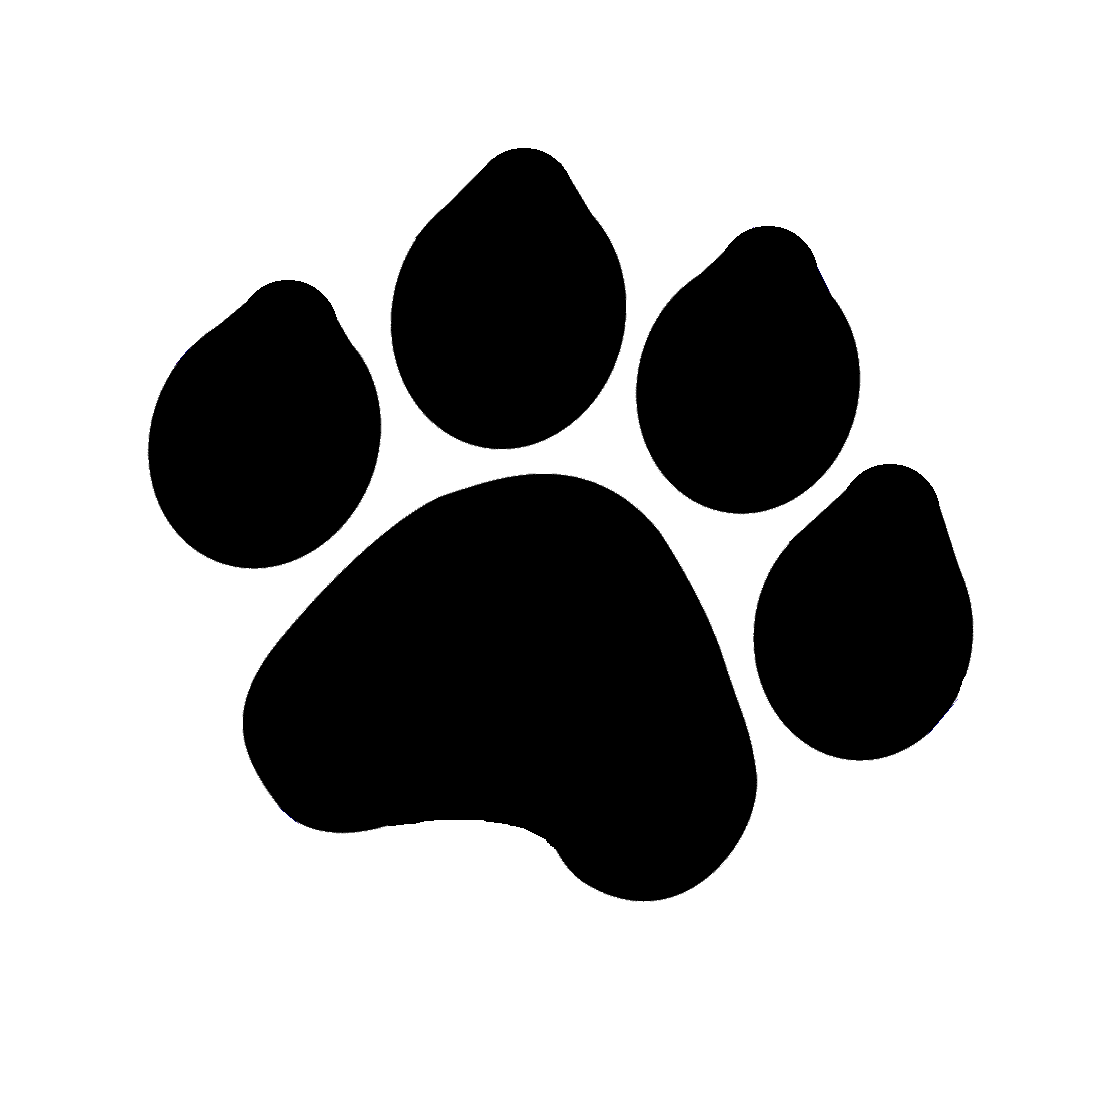 Cougar Paw - Clipart library